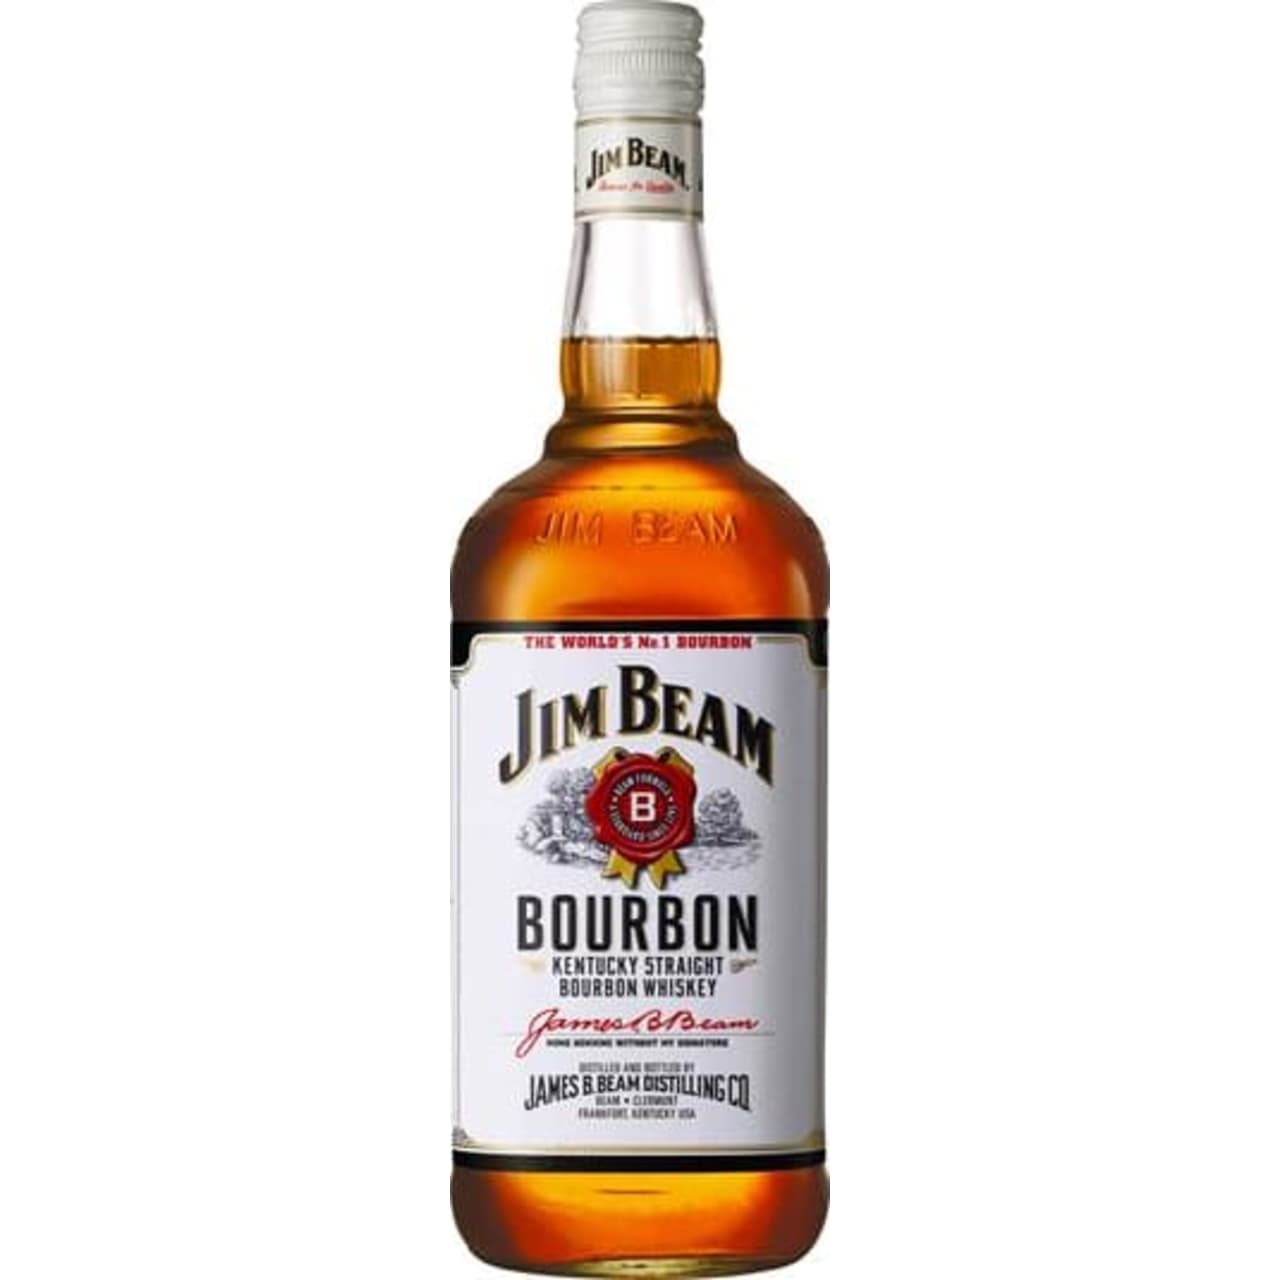 Jim Beam White Label has been aged for four years in oak casks and bottled at 80 proof making this bourbon perfect for mixing in cocktails. It is created from a mixture of corn, rye, barley malt, water, time and pride.